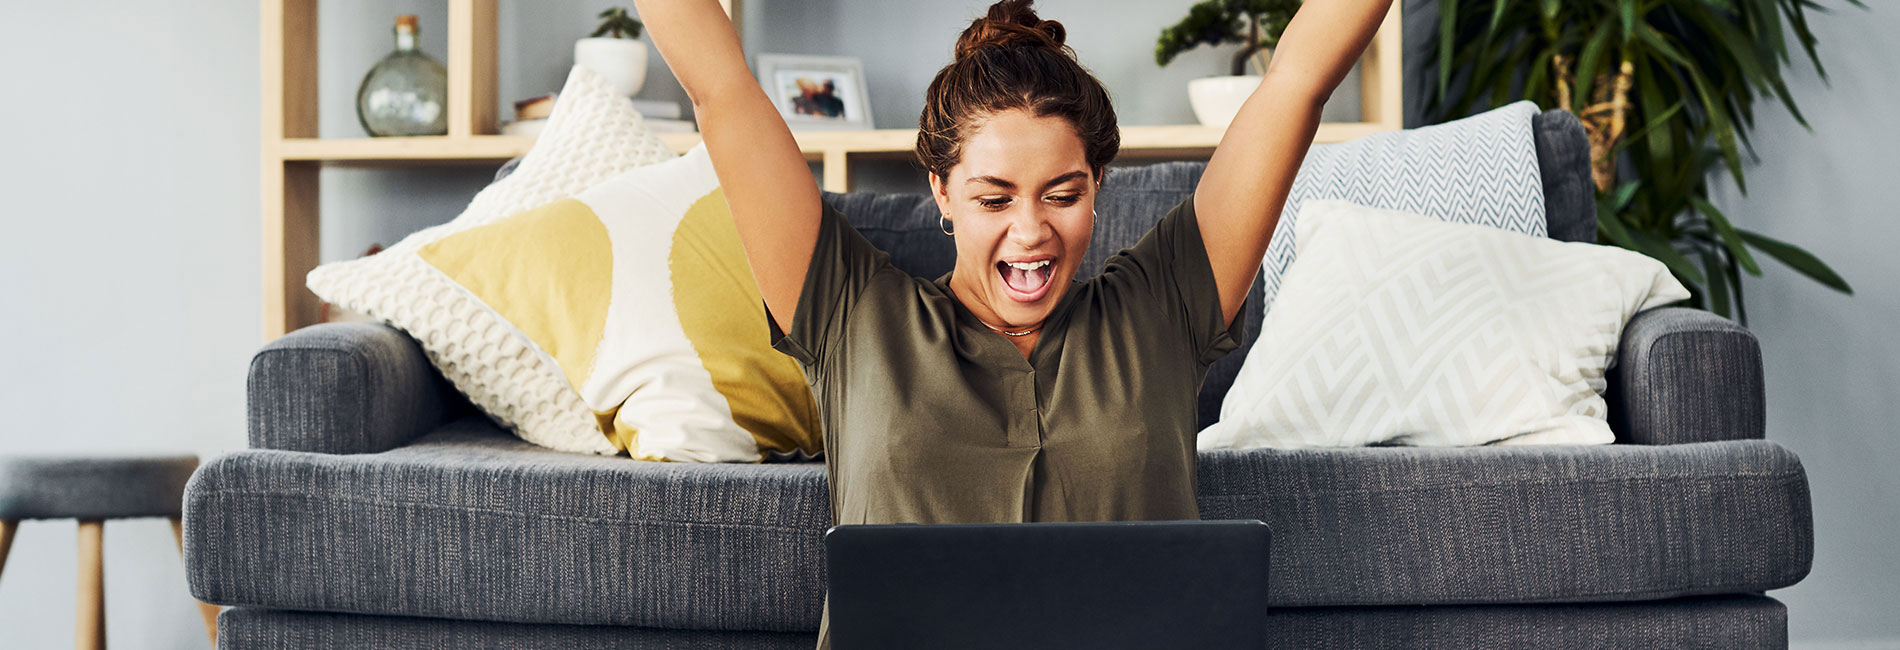 A woman cheering in front of her laptop